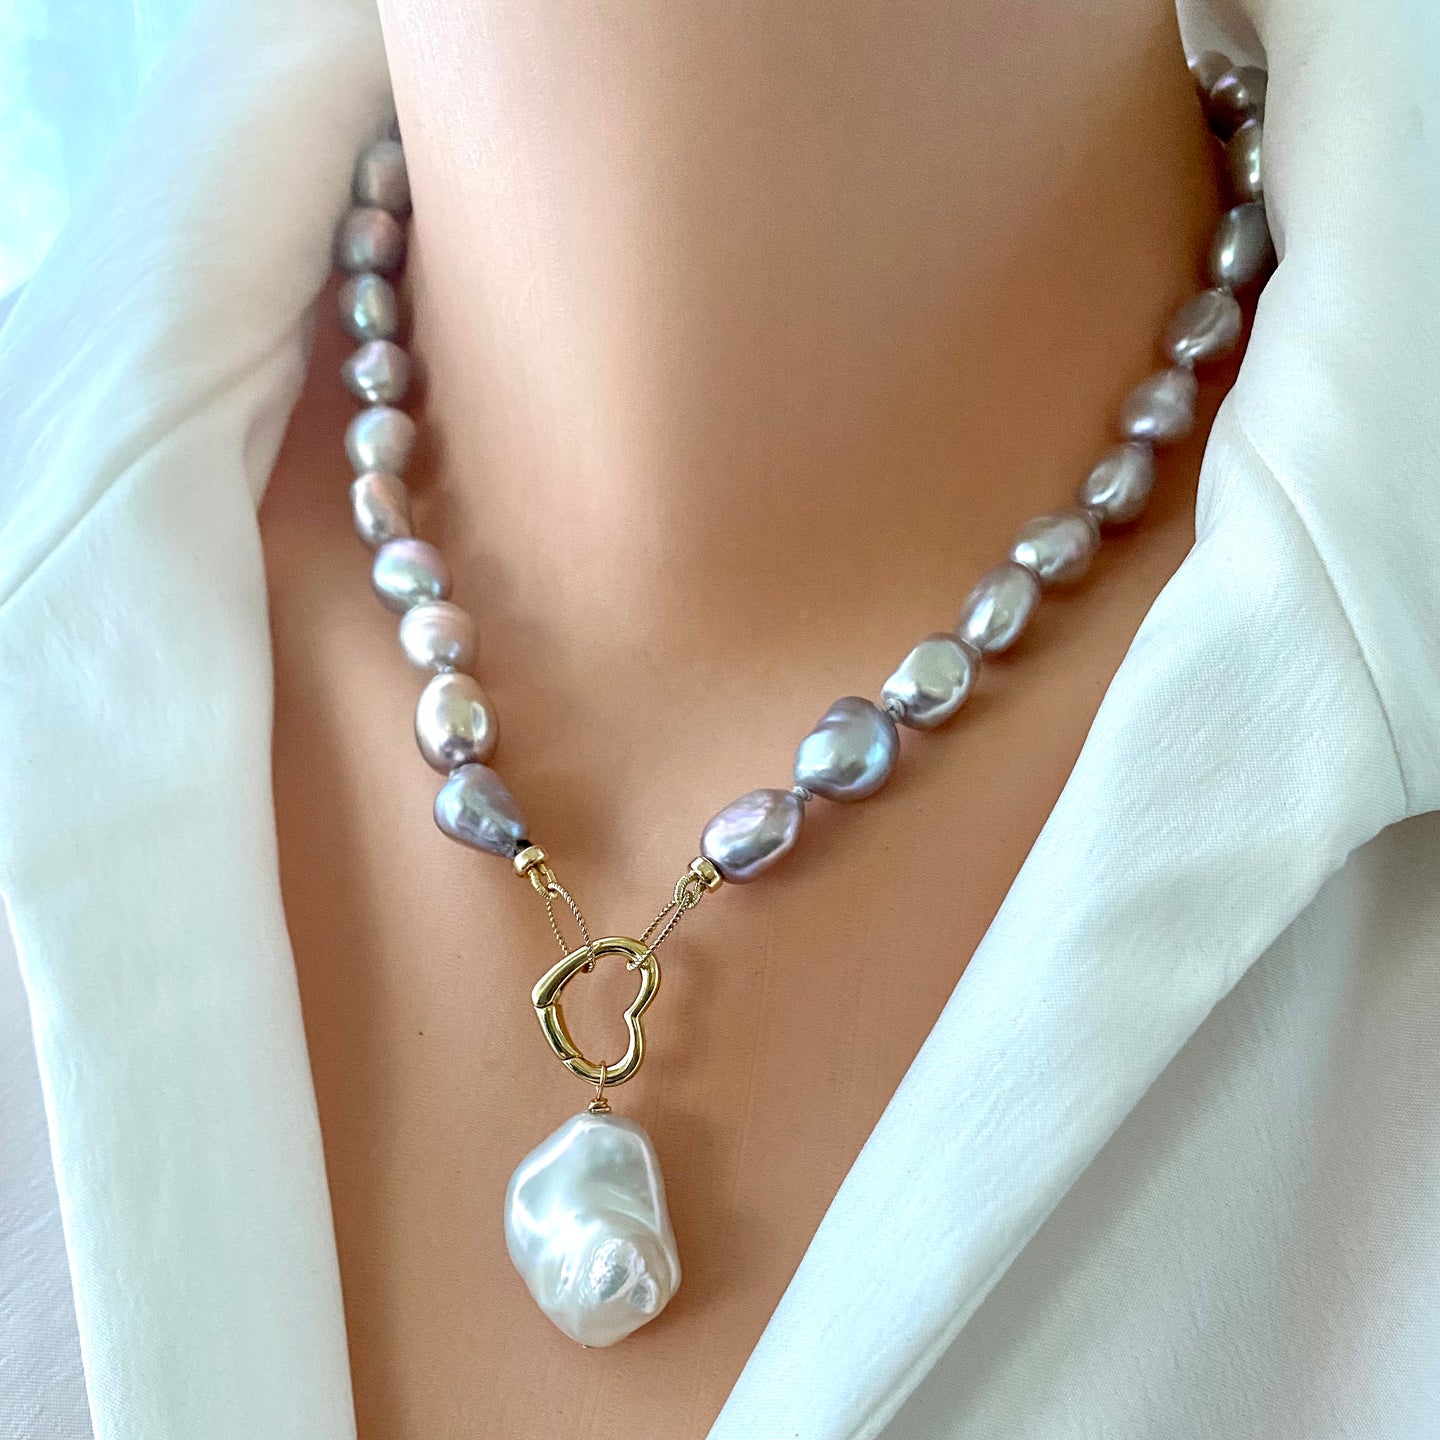 Grey Freshwater Pearl Necklace with White Baroque Pearl Pendant & Heart Closure, Gold Filled Details, 18